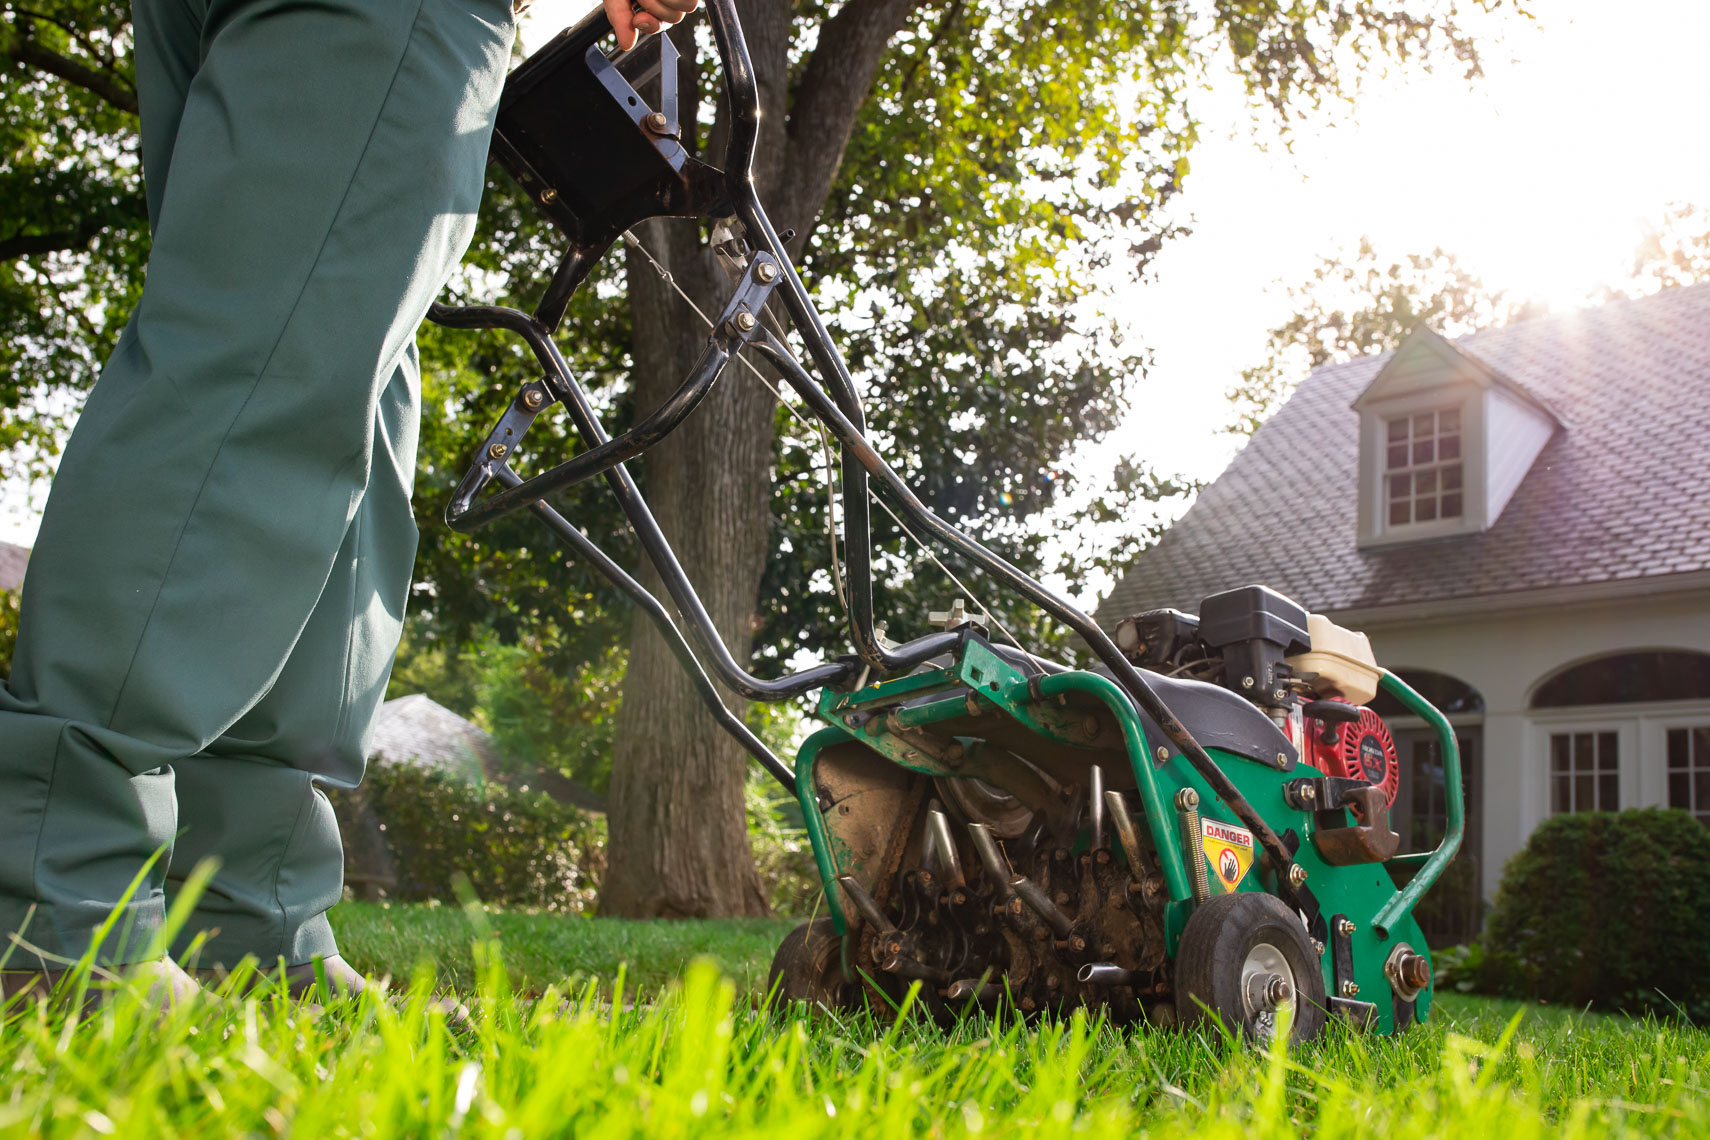 TruGreen technician aerating the lawn with a machine_Robert_Holland_Photographer_Director